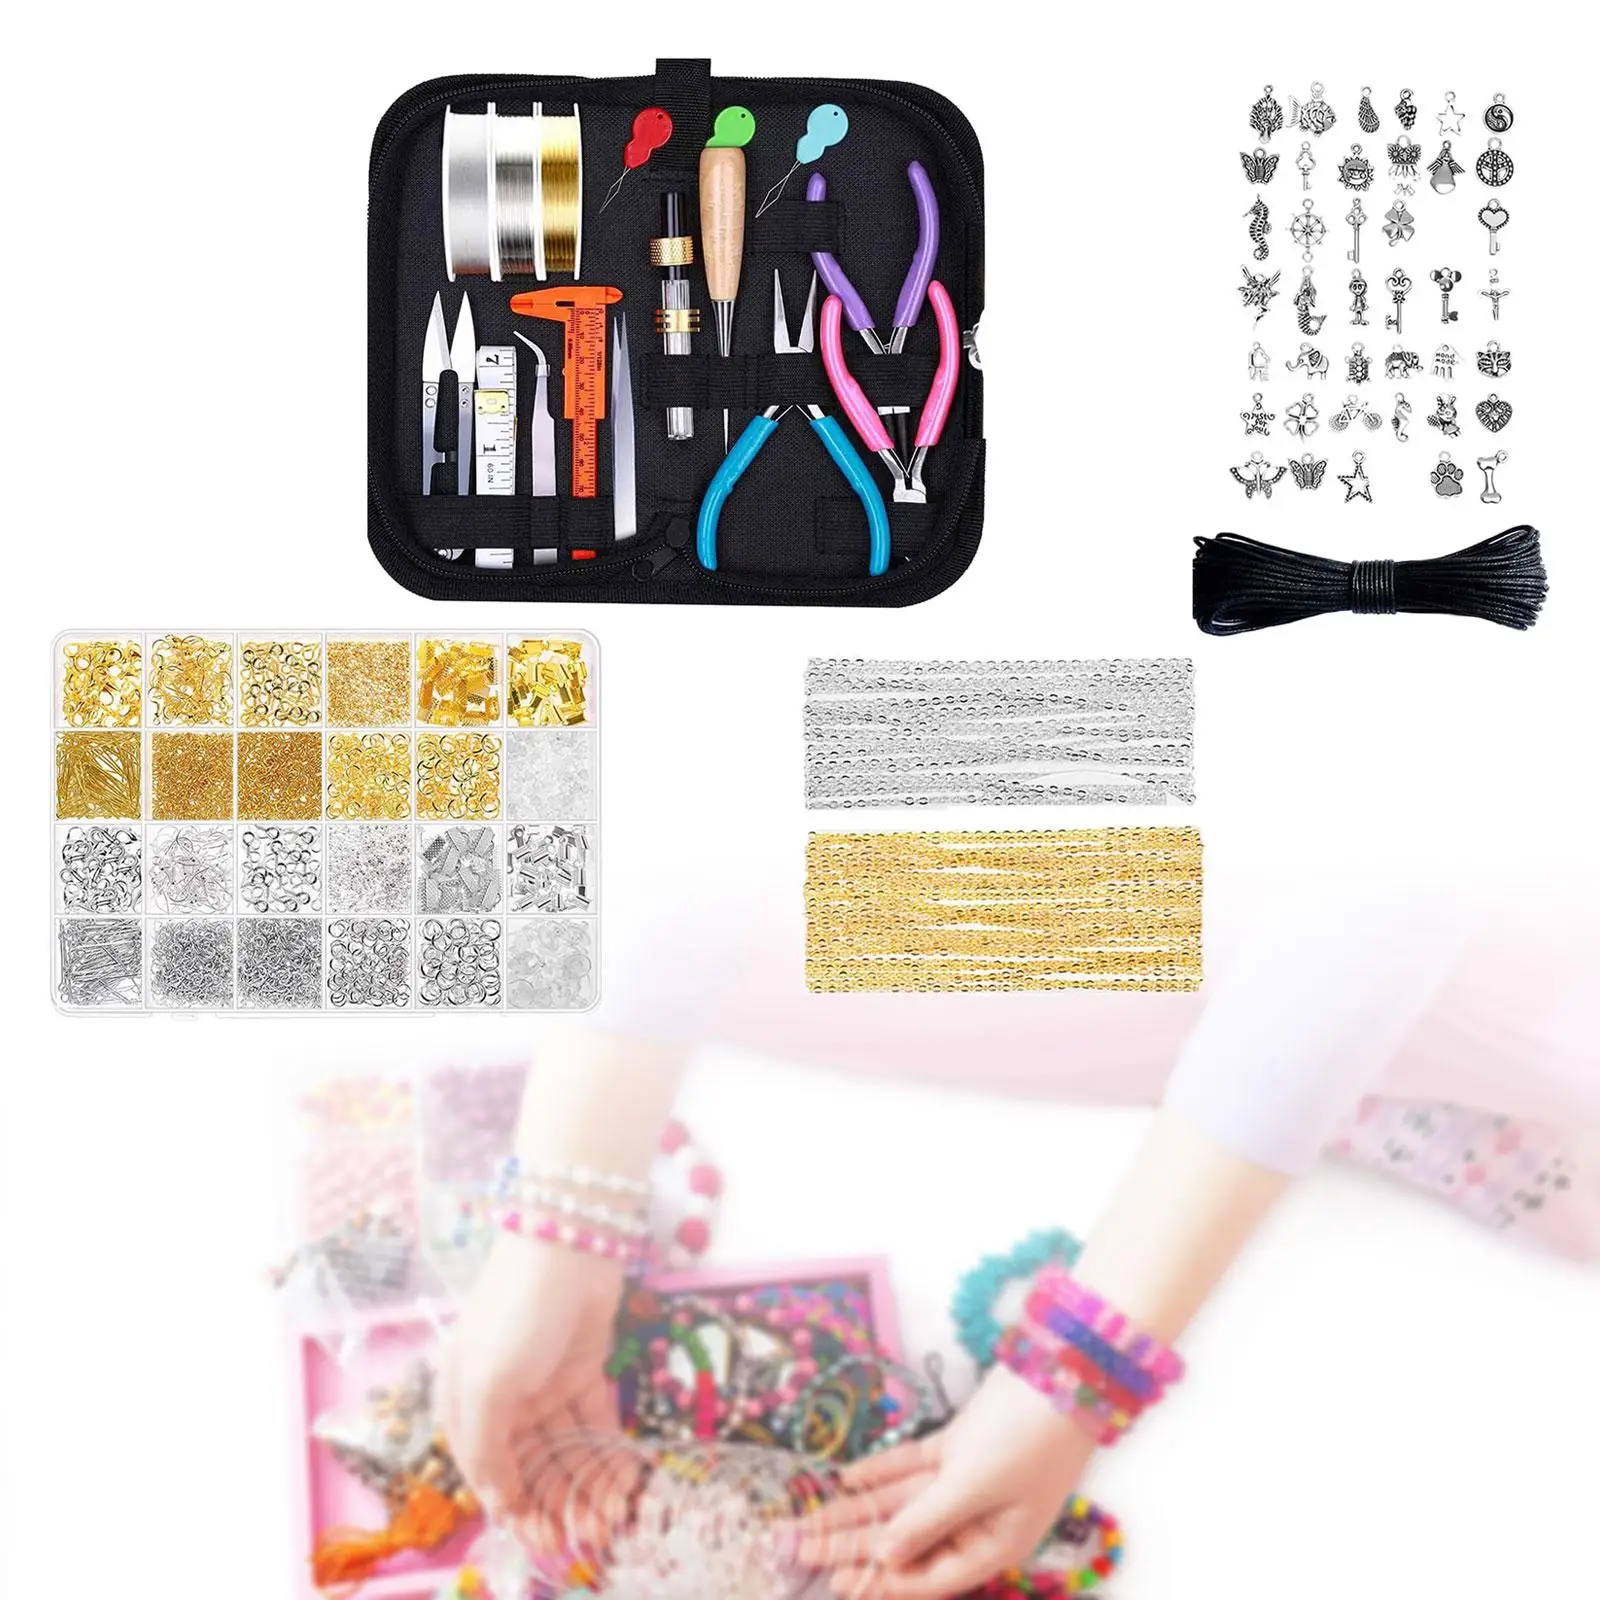 

Jewelry Making Kit Craft Supplies Repair Tool Beading Pliers Jewelry Findings Women Jewelry Wires DIY for Earrings Pendant Charm